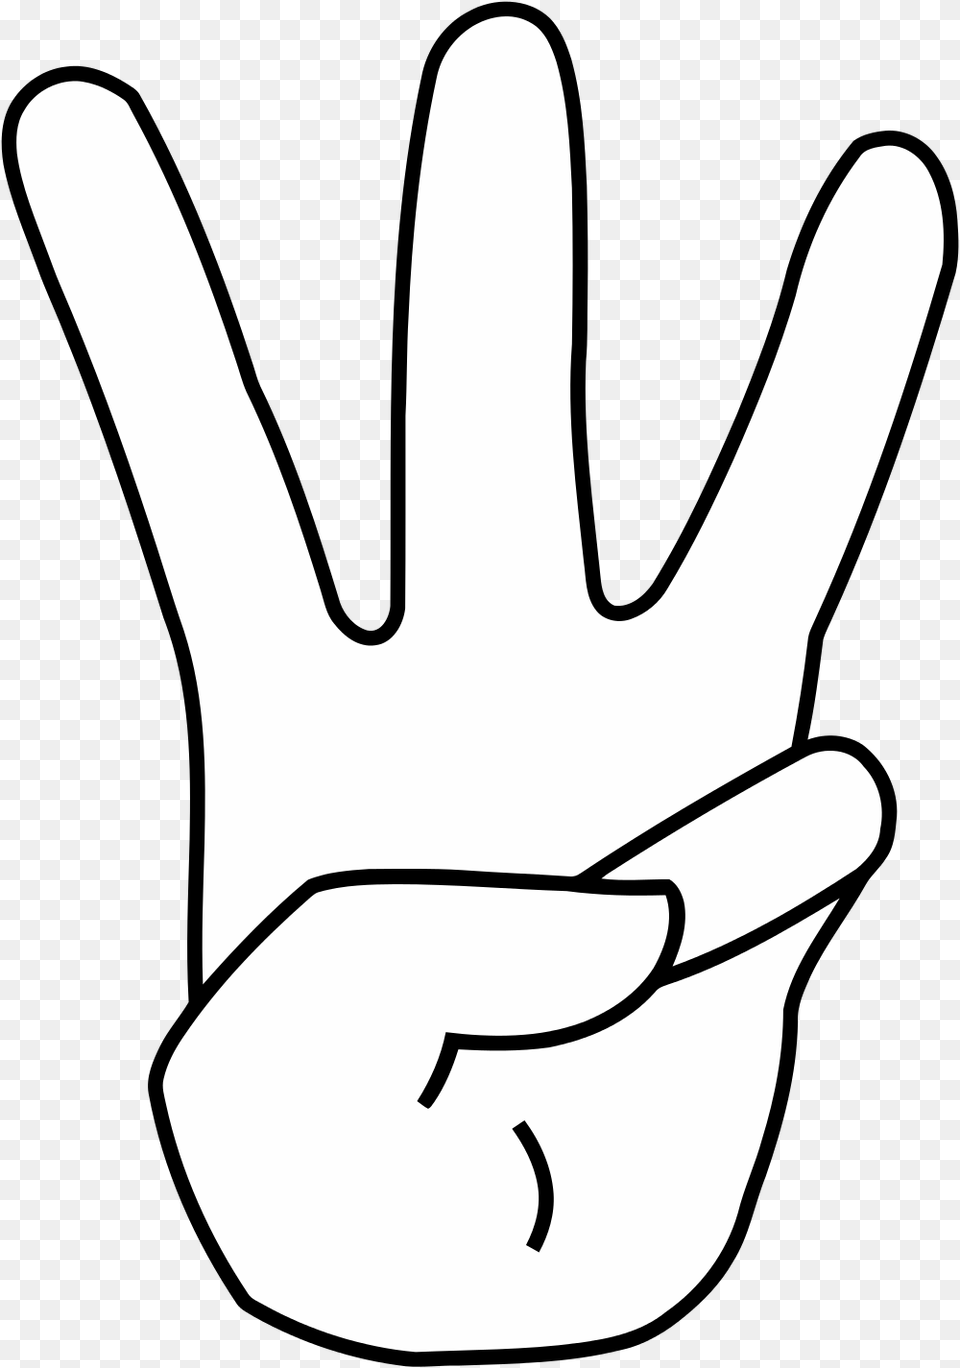 Fingers Crossed Clipart Black And White Clipart Three, Clothing, Cutlery, Glove, Body Part Free Transparent Png